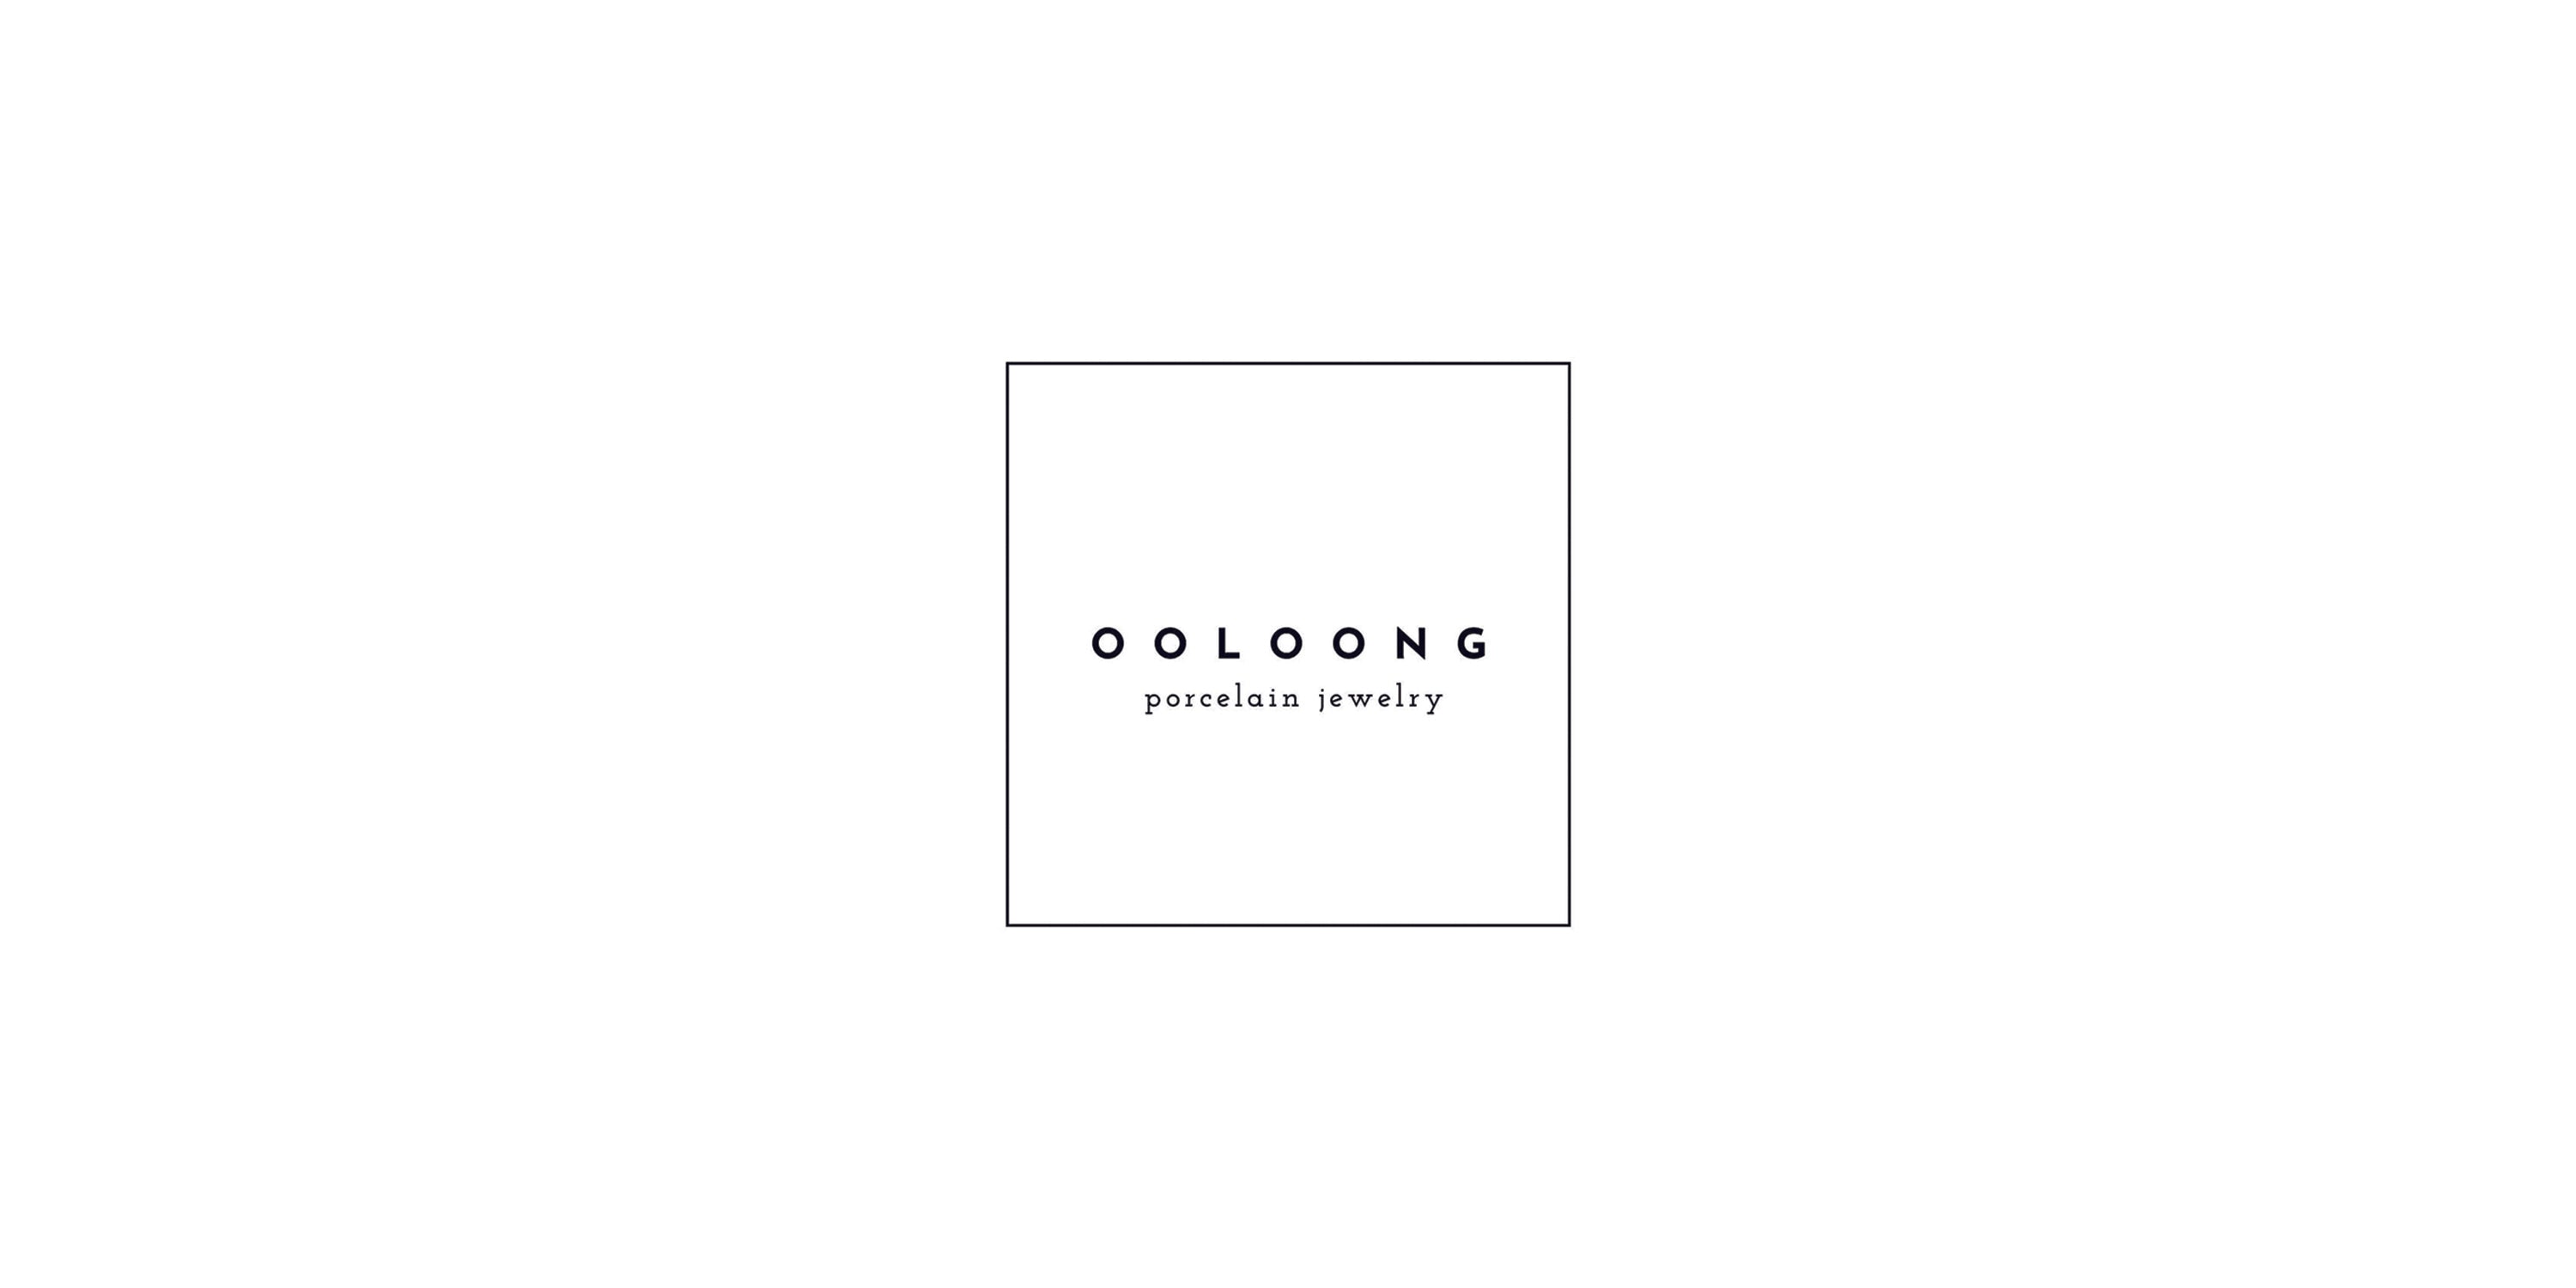 Ooloong logo